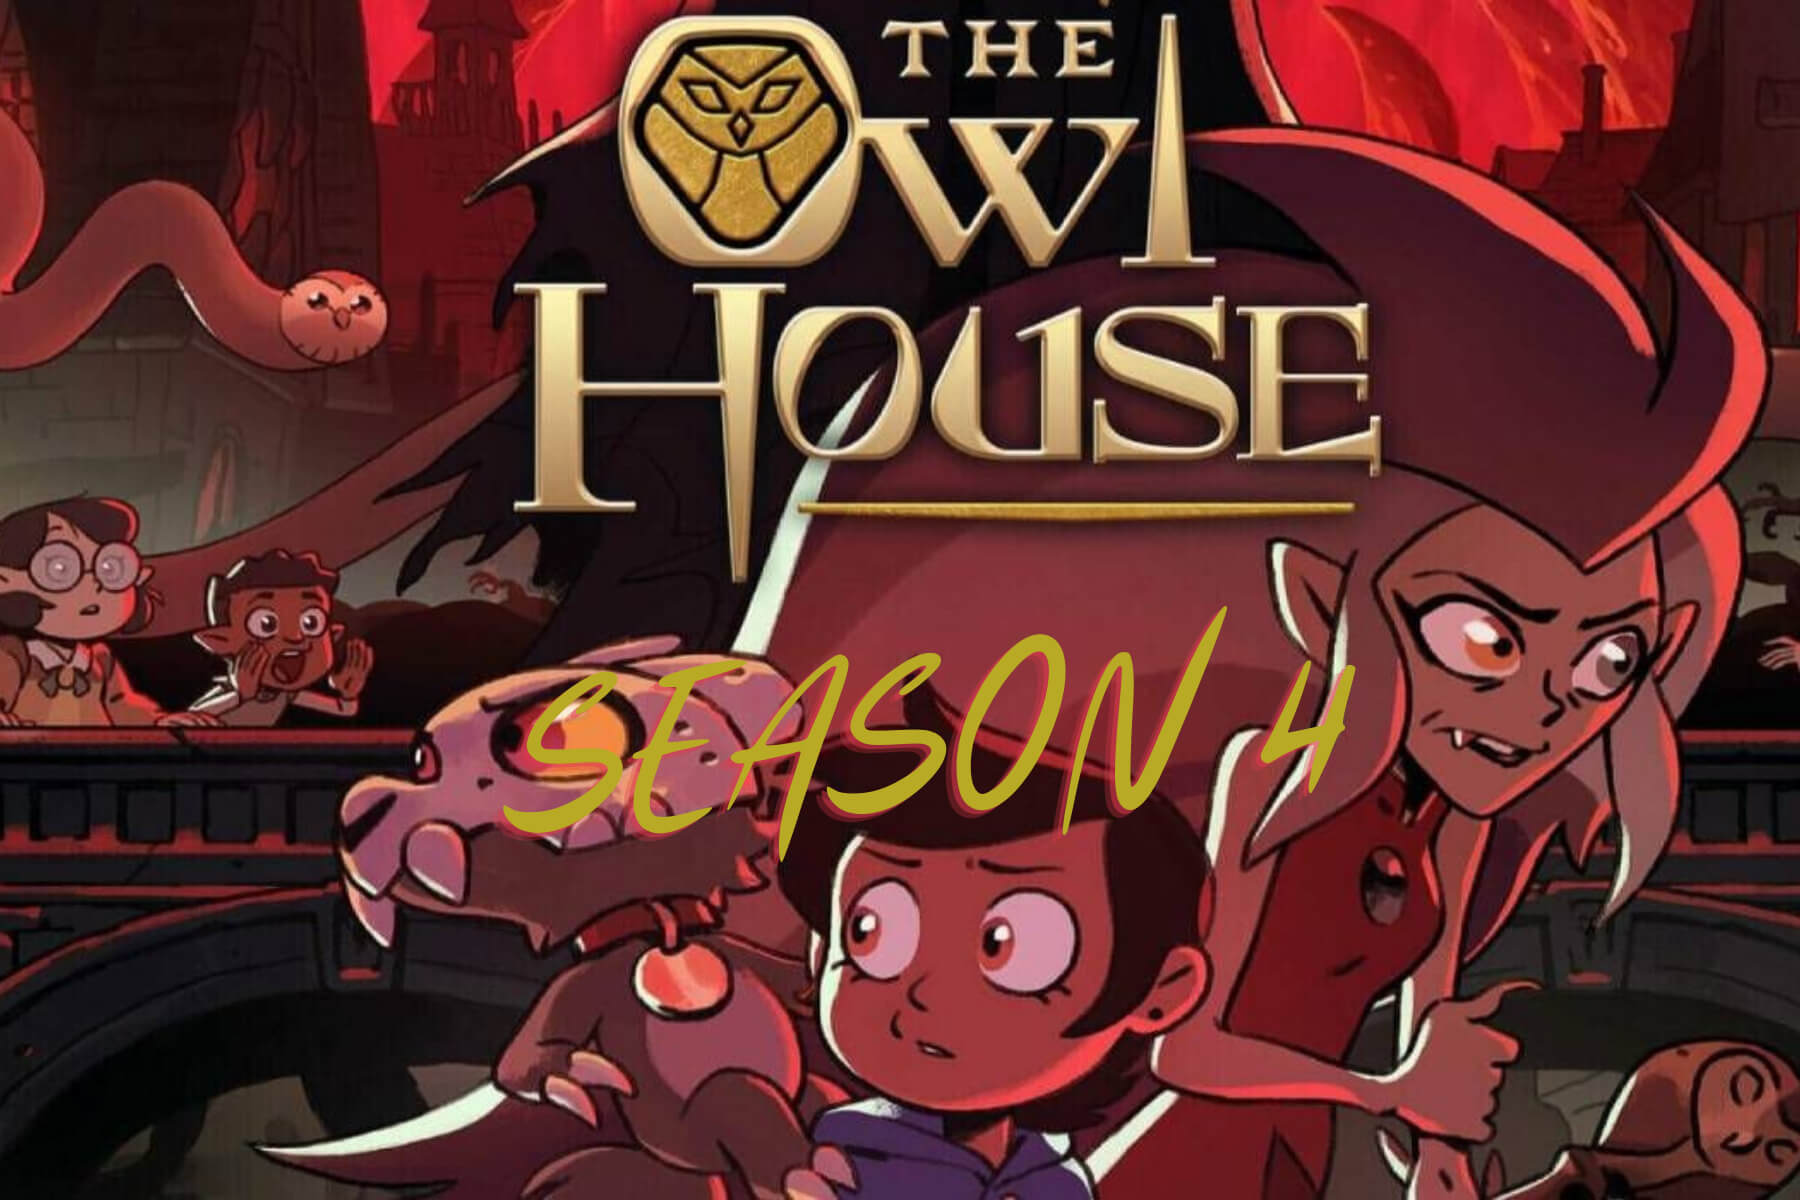 How many episodes of The Owl House are there?